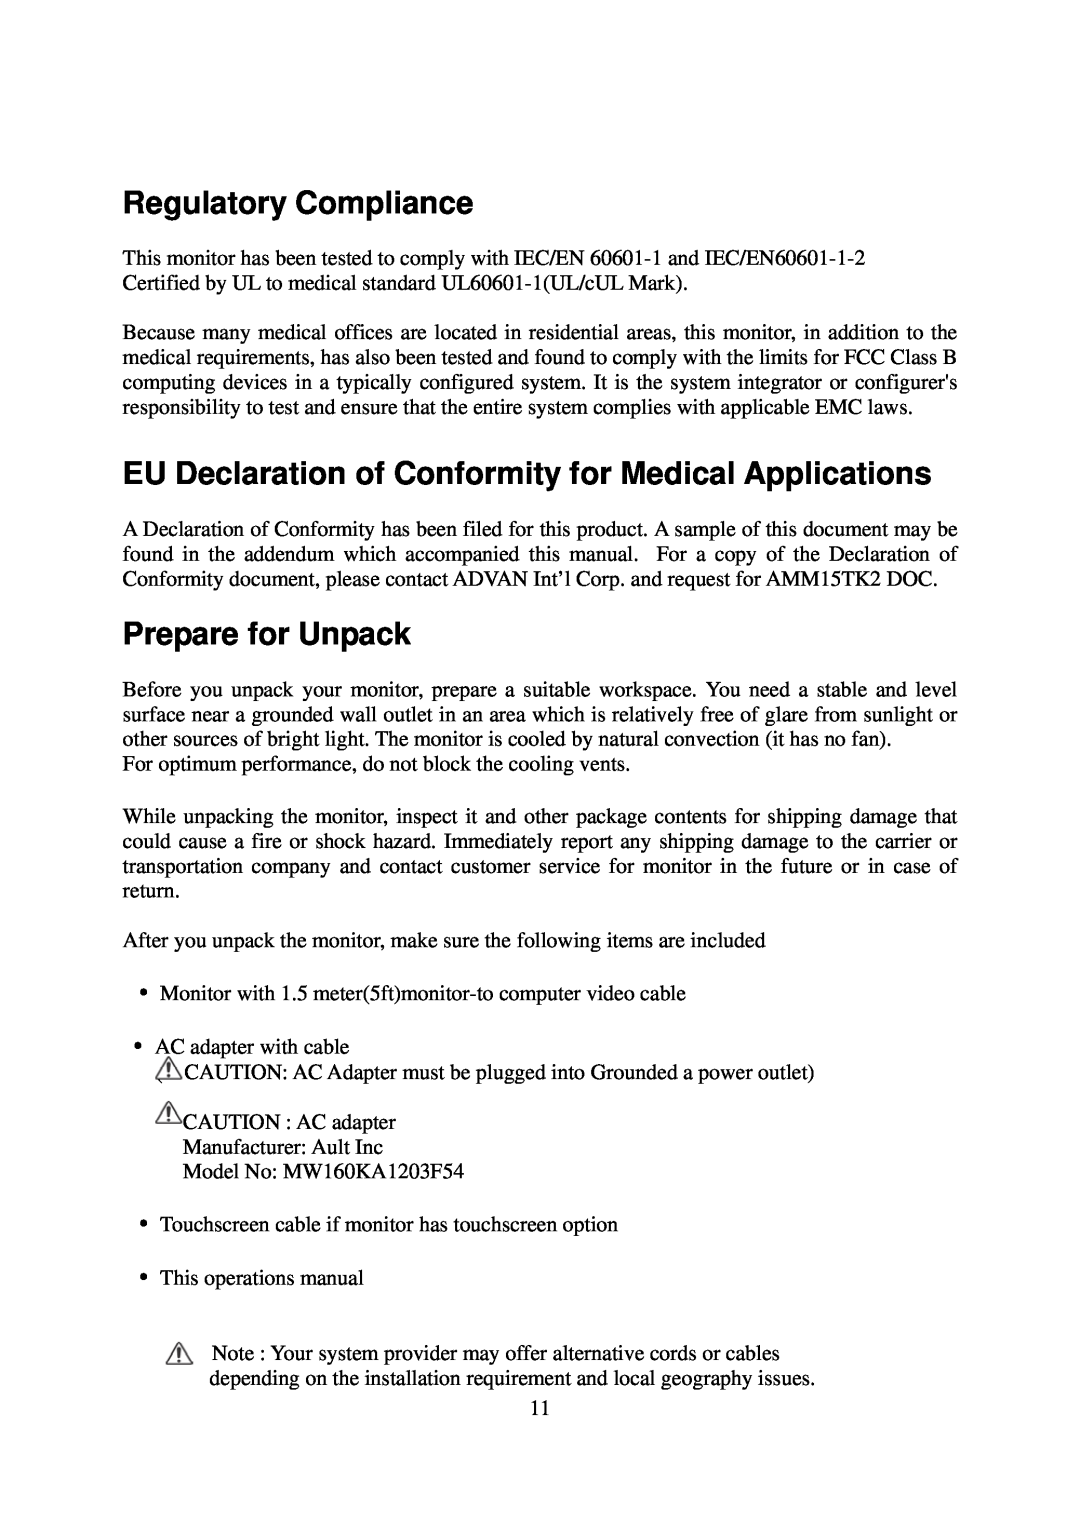 Elo TouchSystems AMM15TK2 Regulatory Compliance, EU Declaration of Conformity for Medical Applications, Prepare for Unpack 